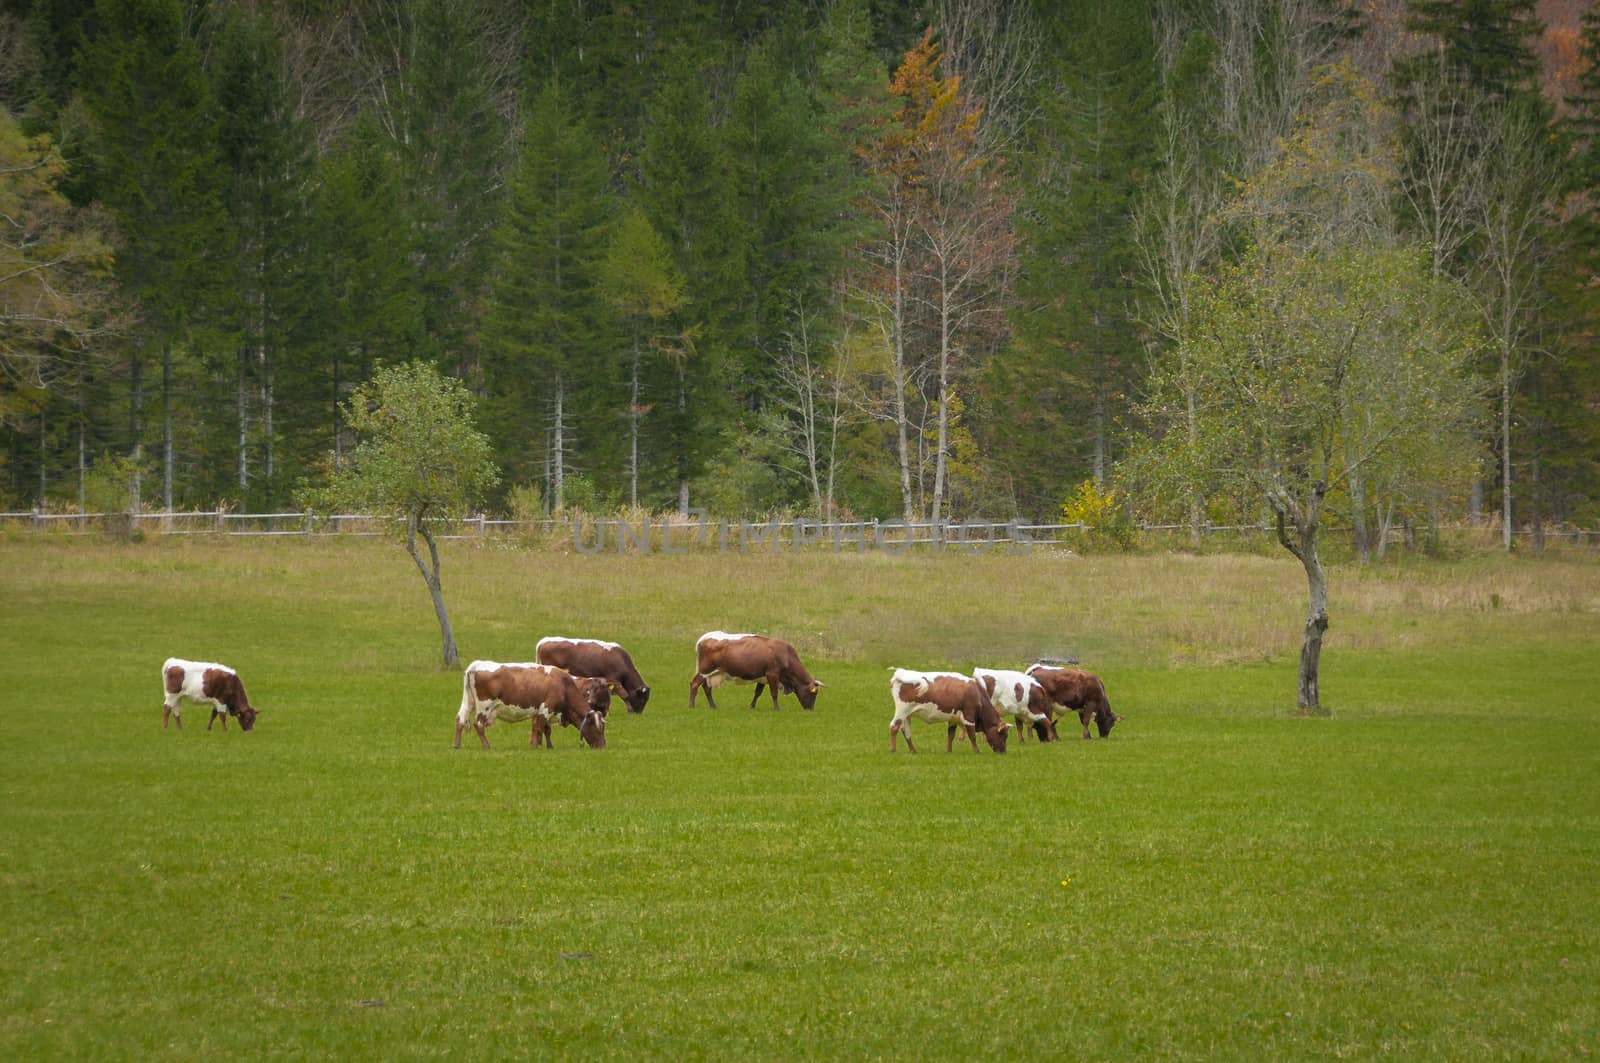 Cattle on pasture by asafaric